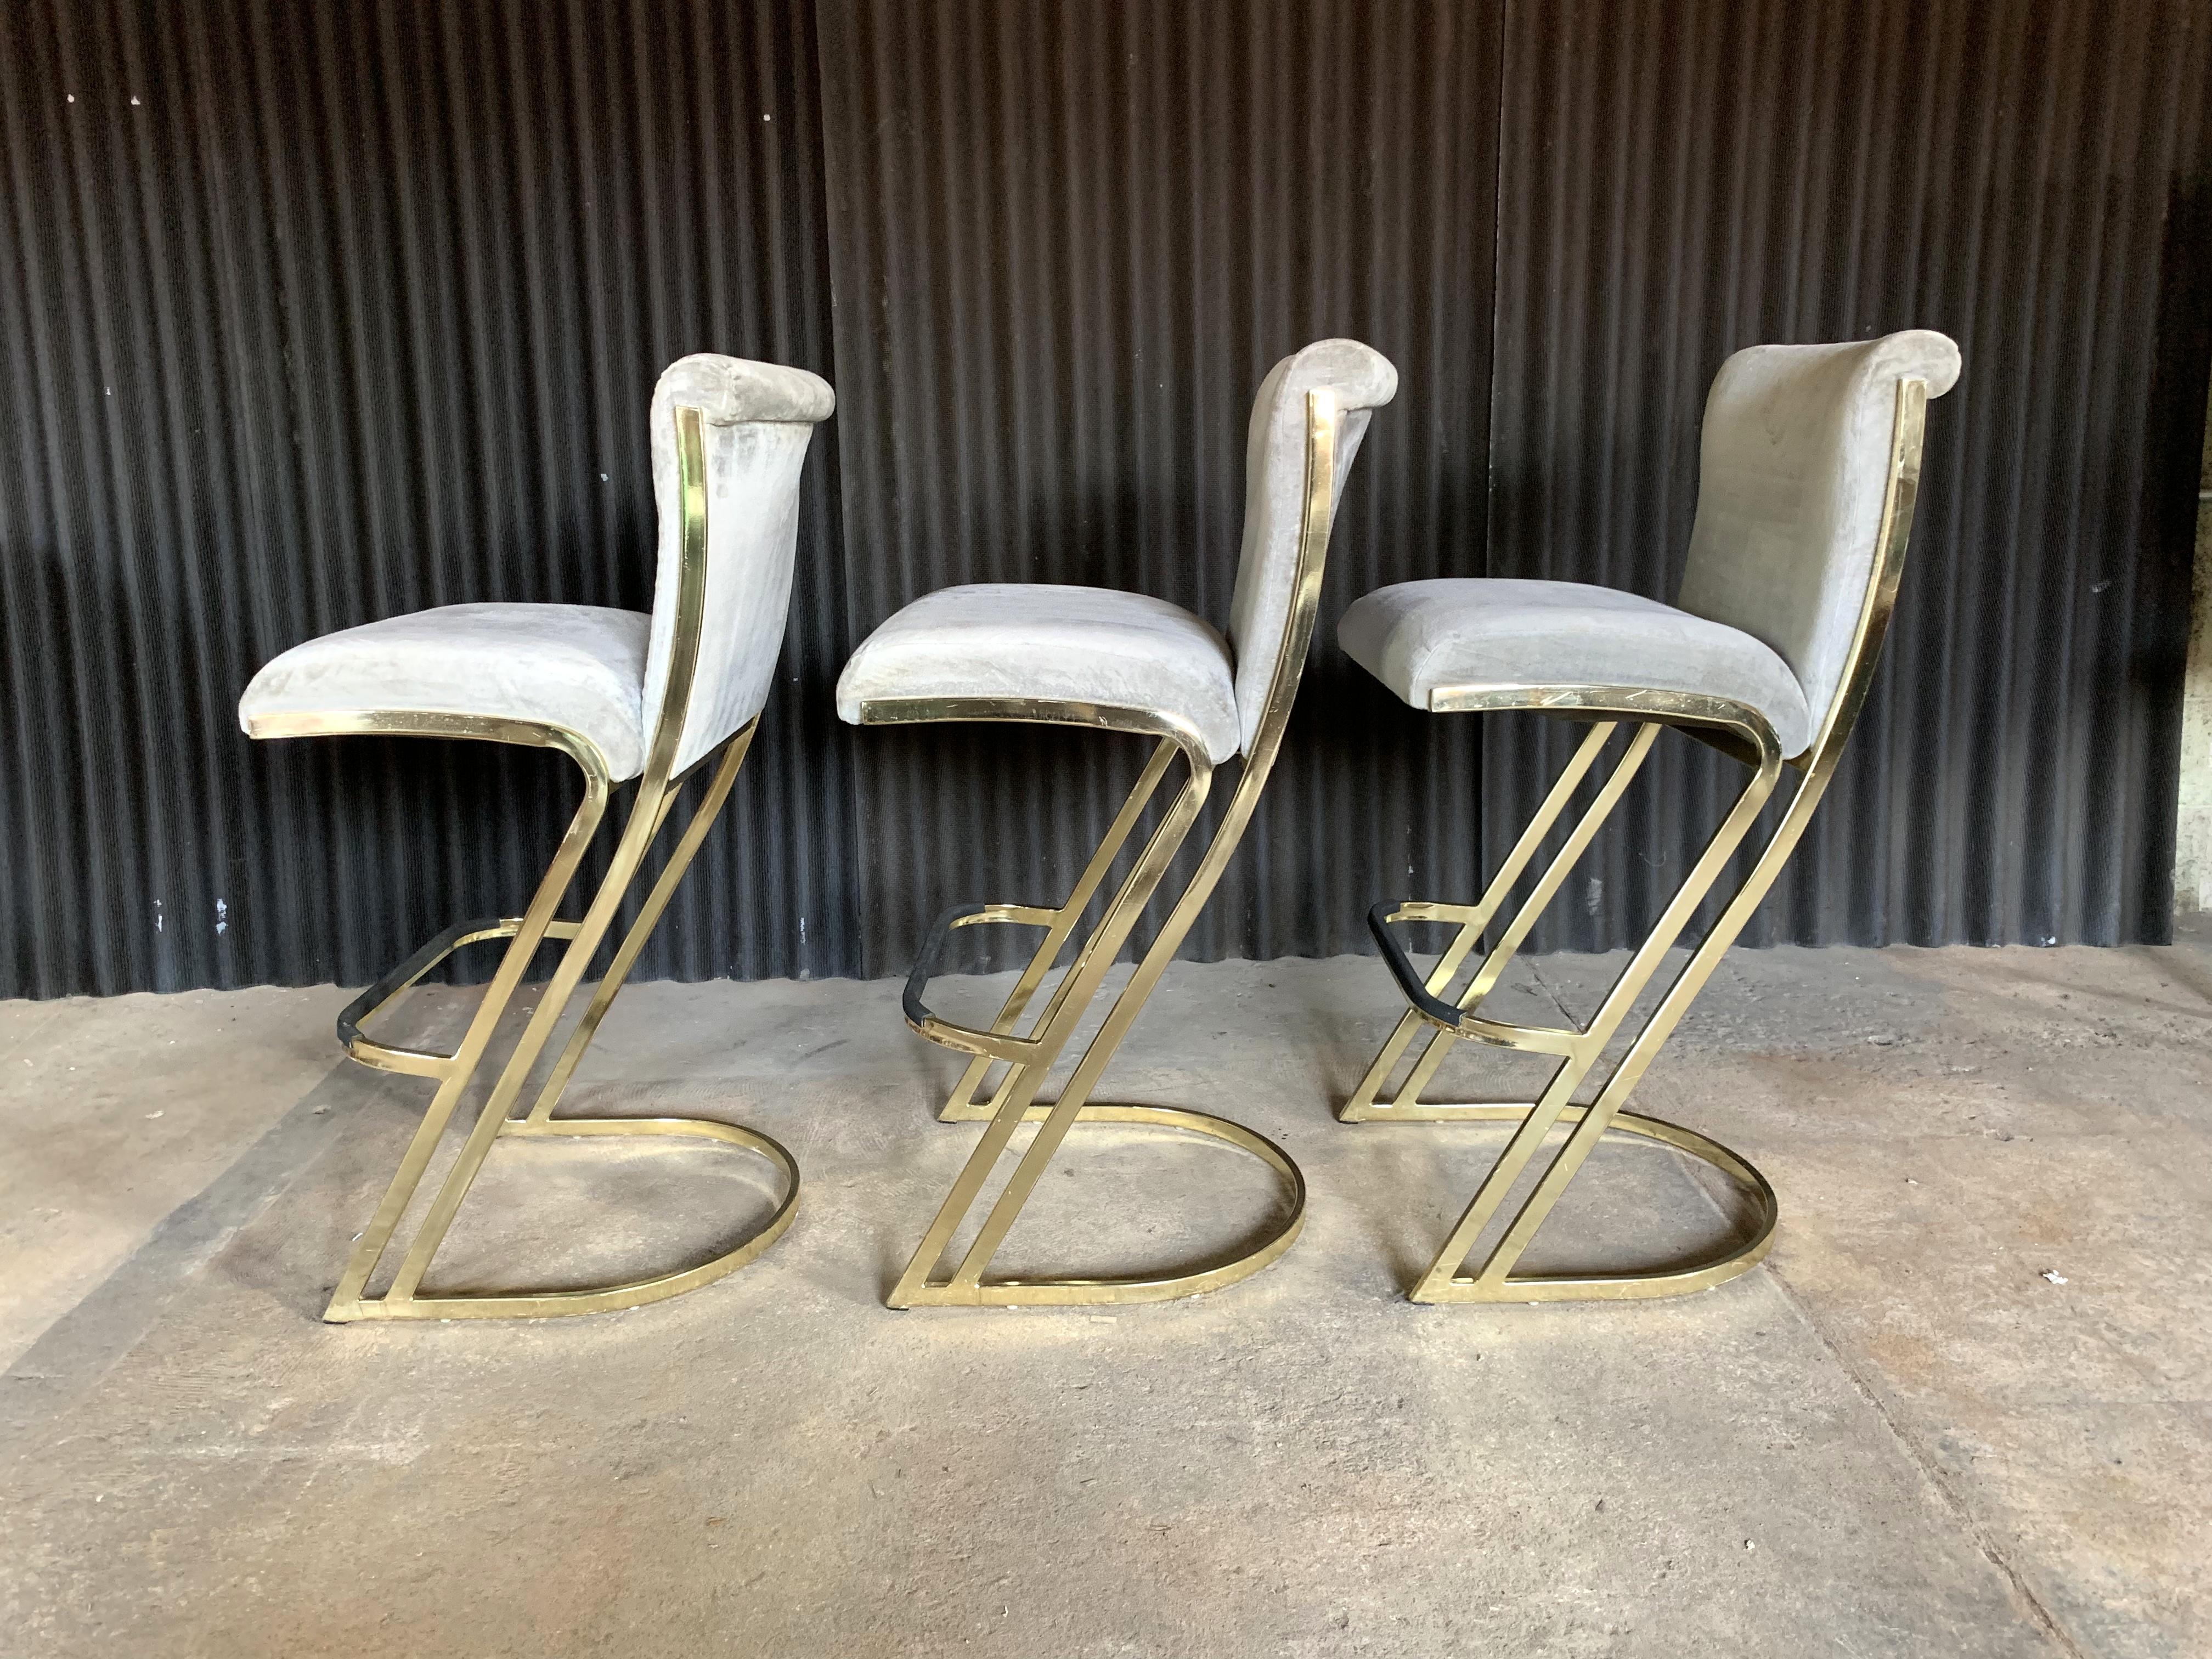 Fun trio of brass stools in the style of Pierre Cardin.
Brass is in great condition with only minor scratches. No pitting.
Just had the fabric professionally cleaned yet these would be perfect for recovering.
One wear mark/hole as shown.
Sturdy